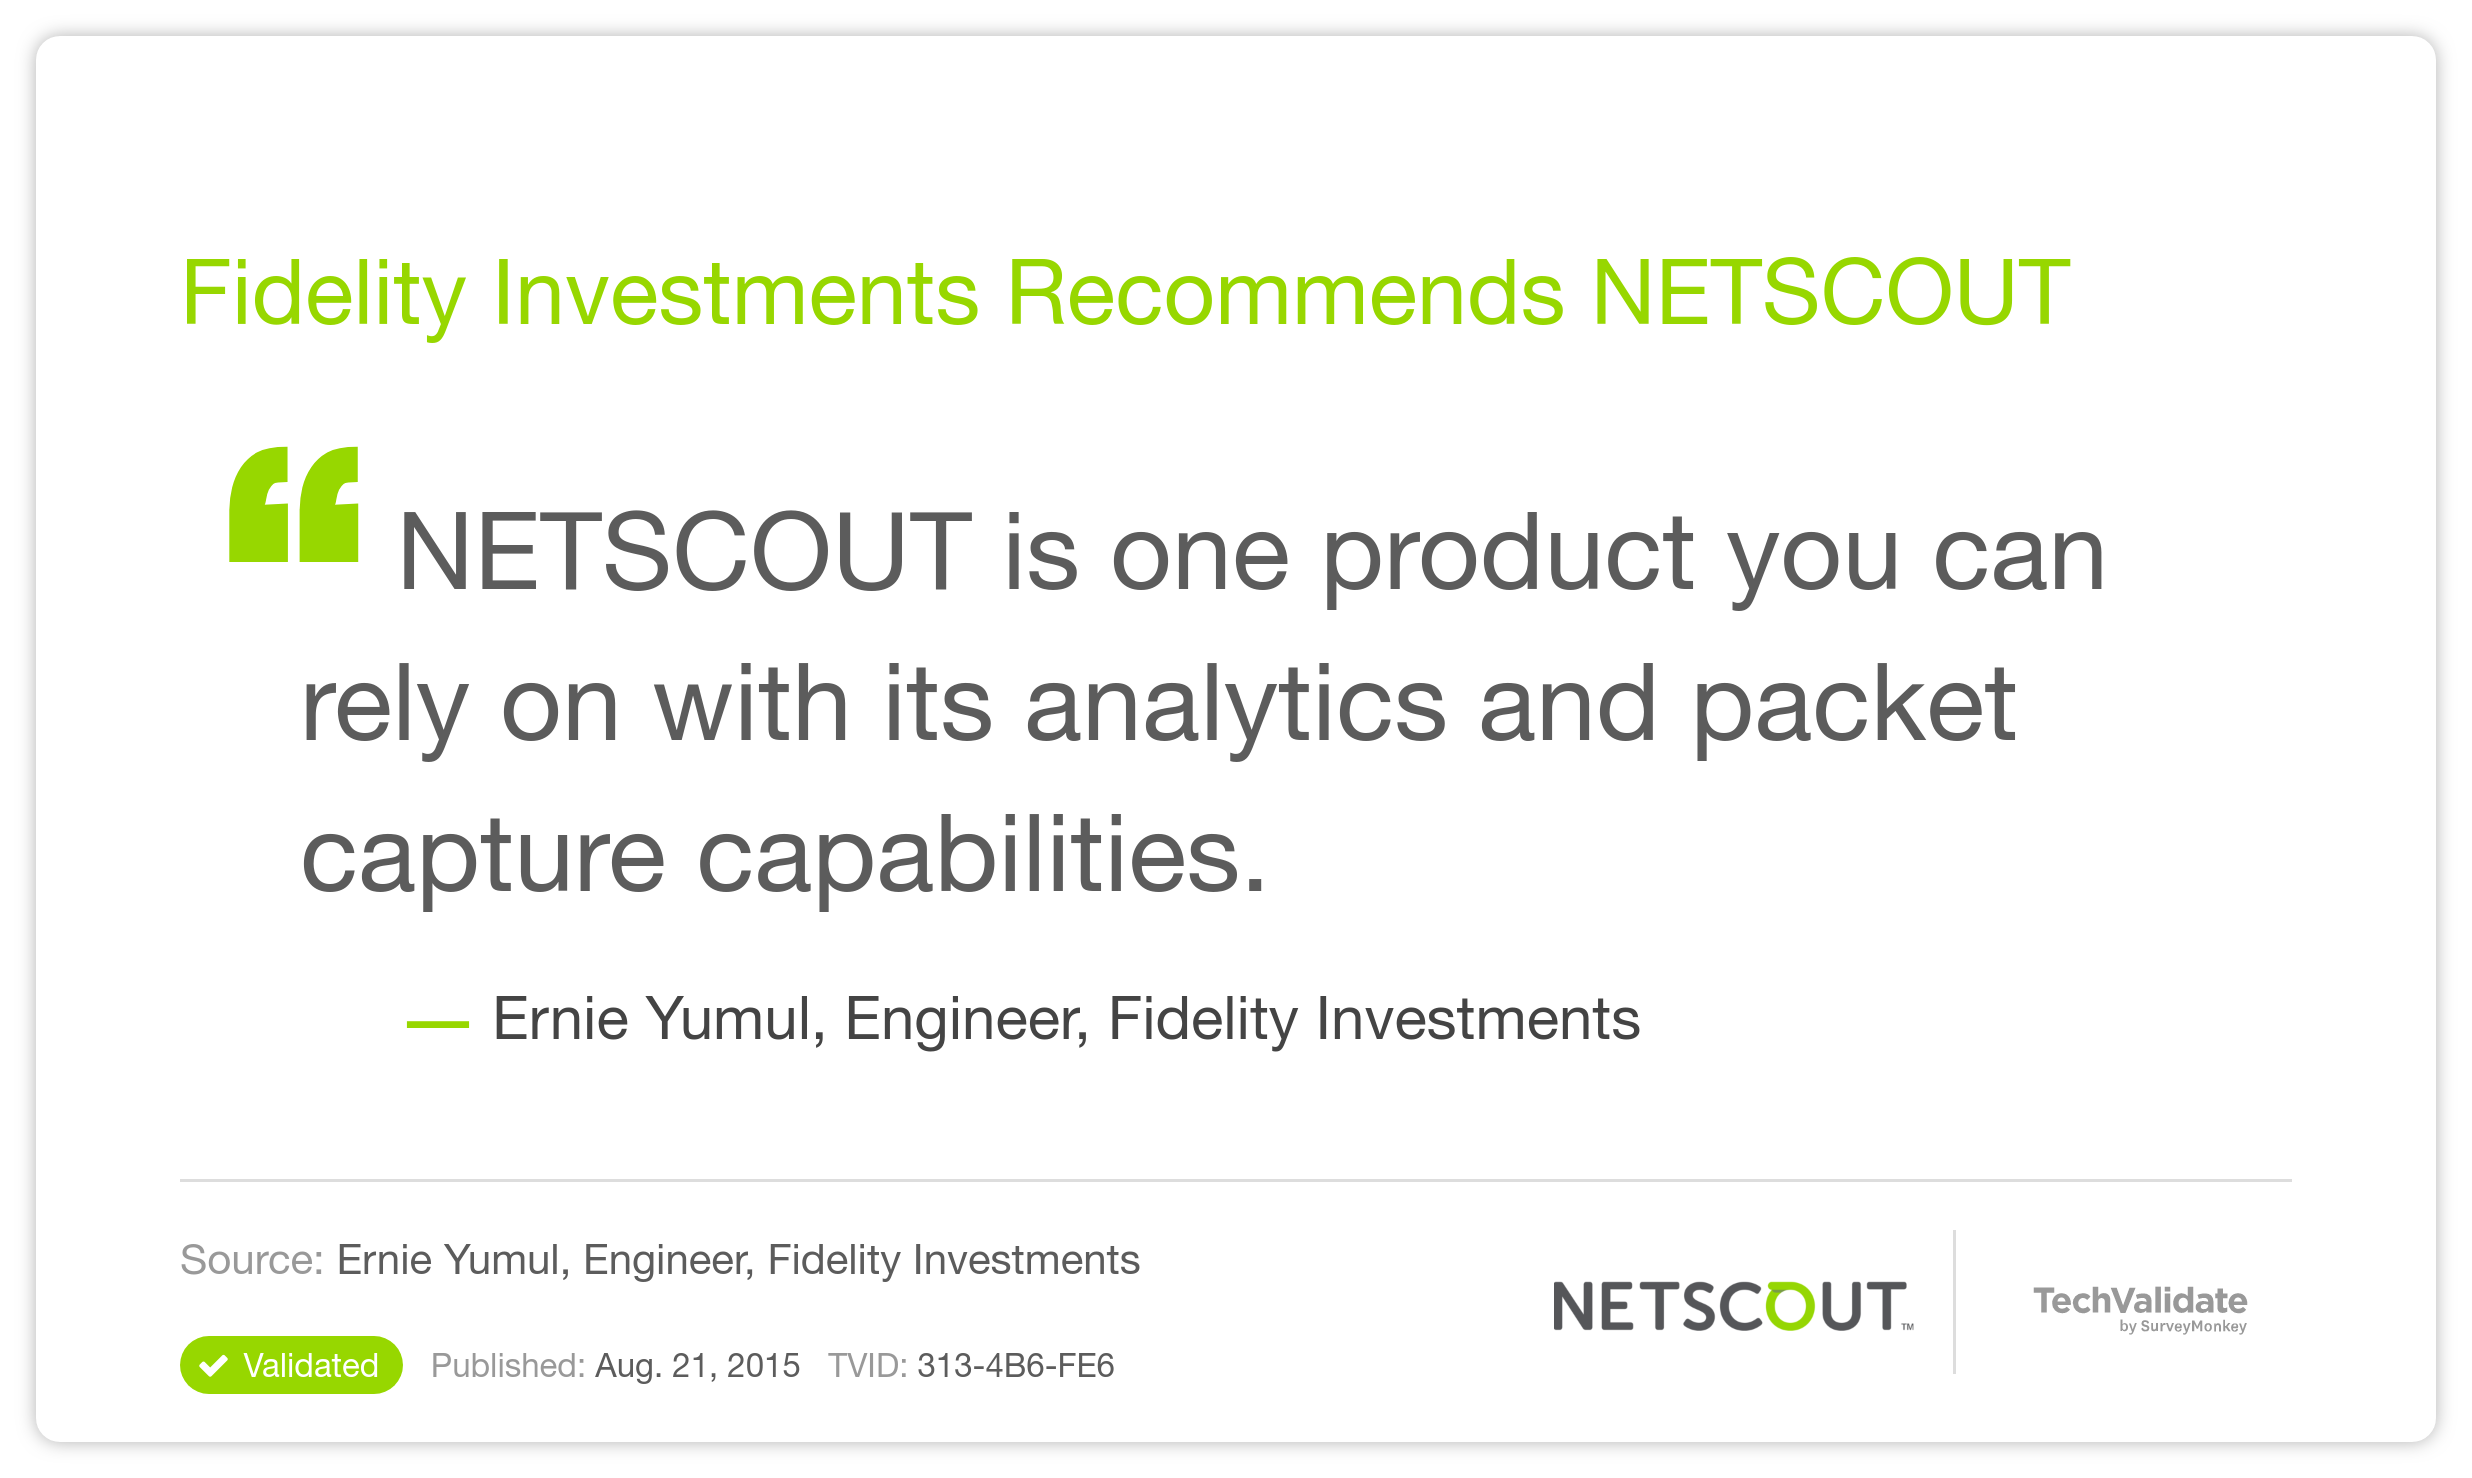 Fidelity Investments Recommends NETSCOUT